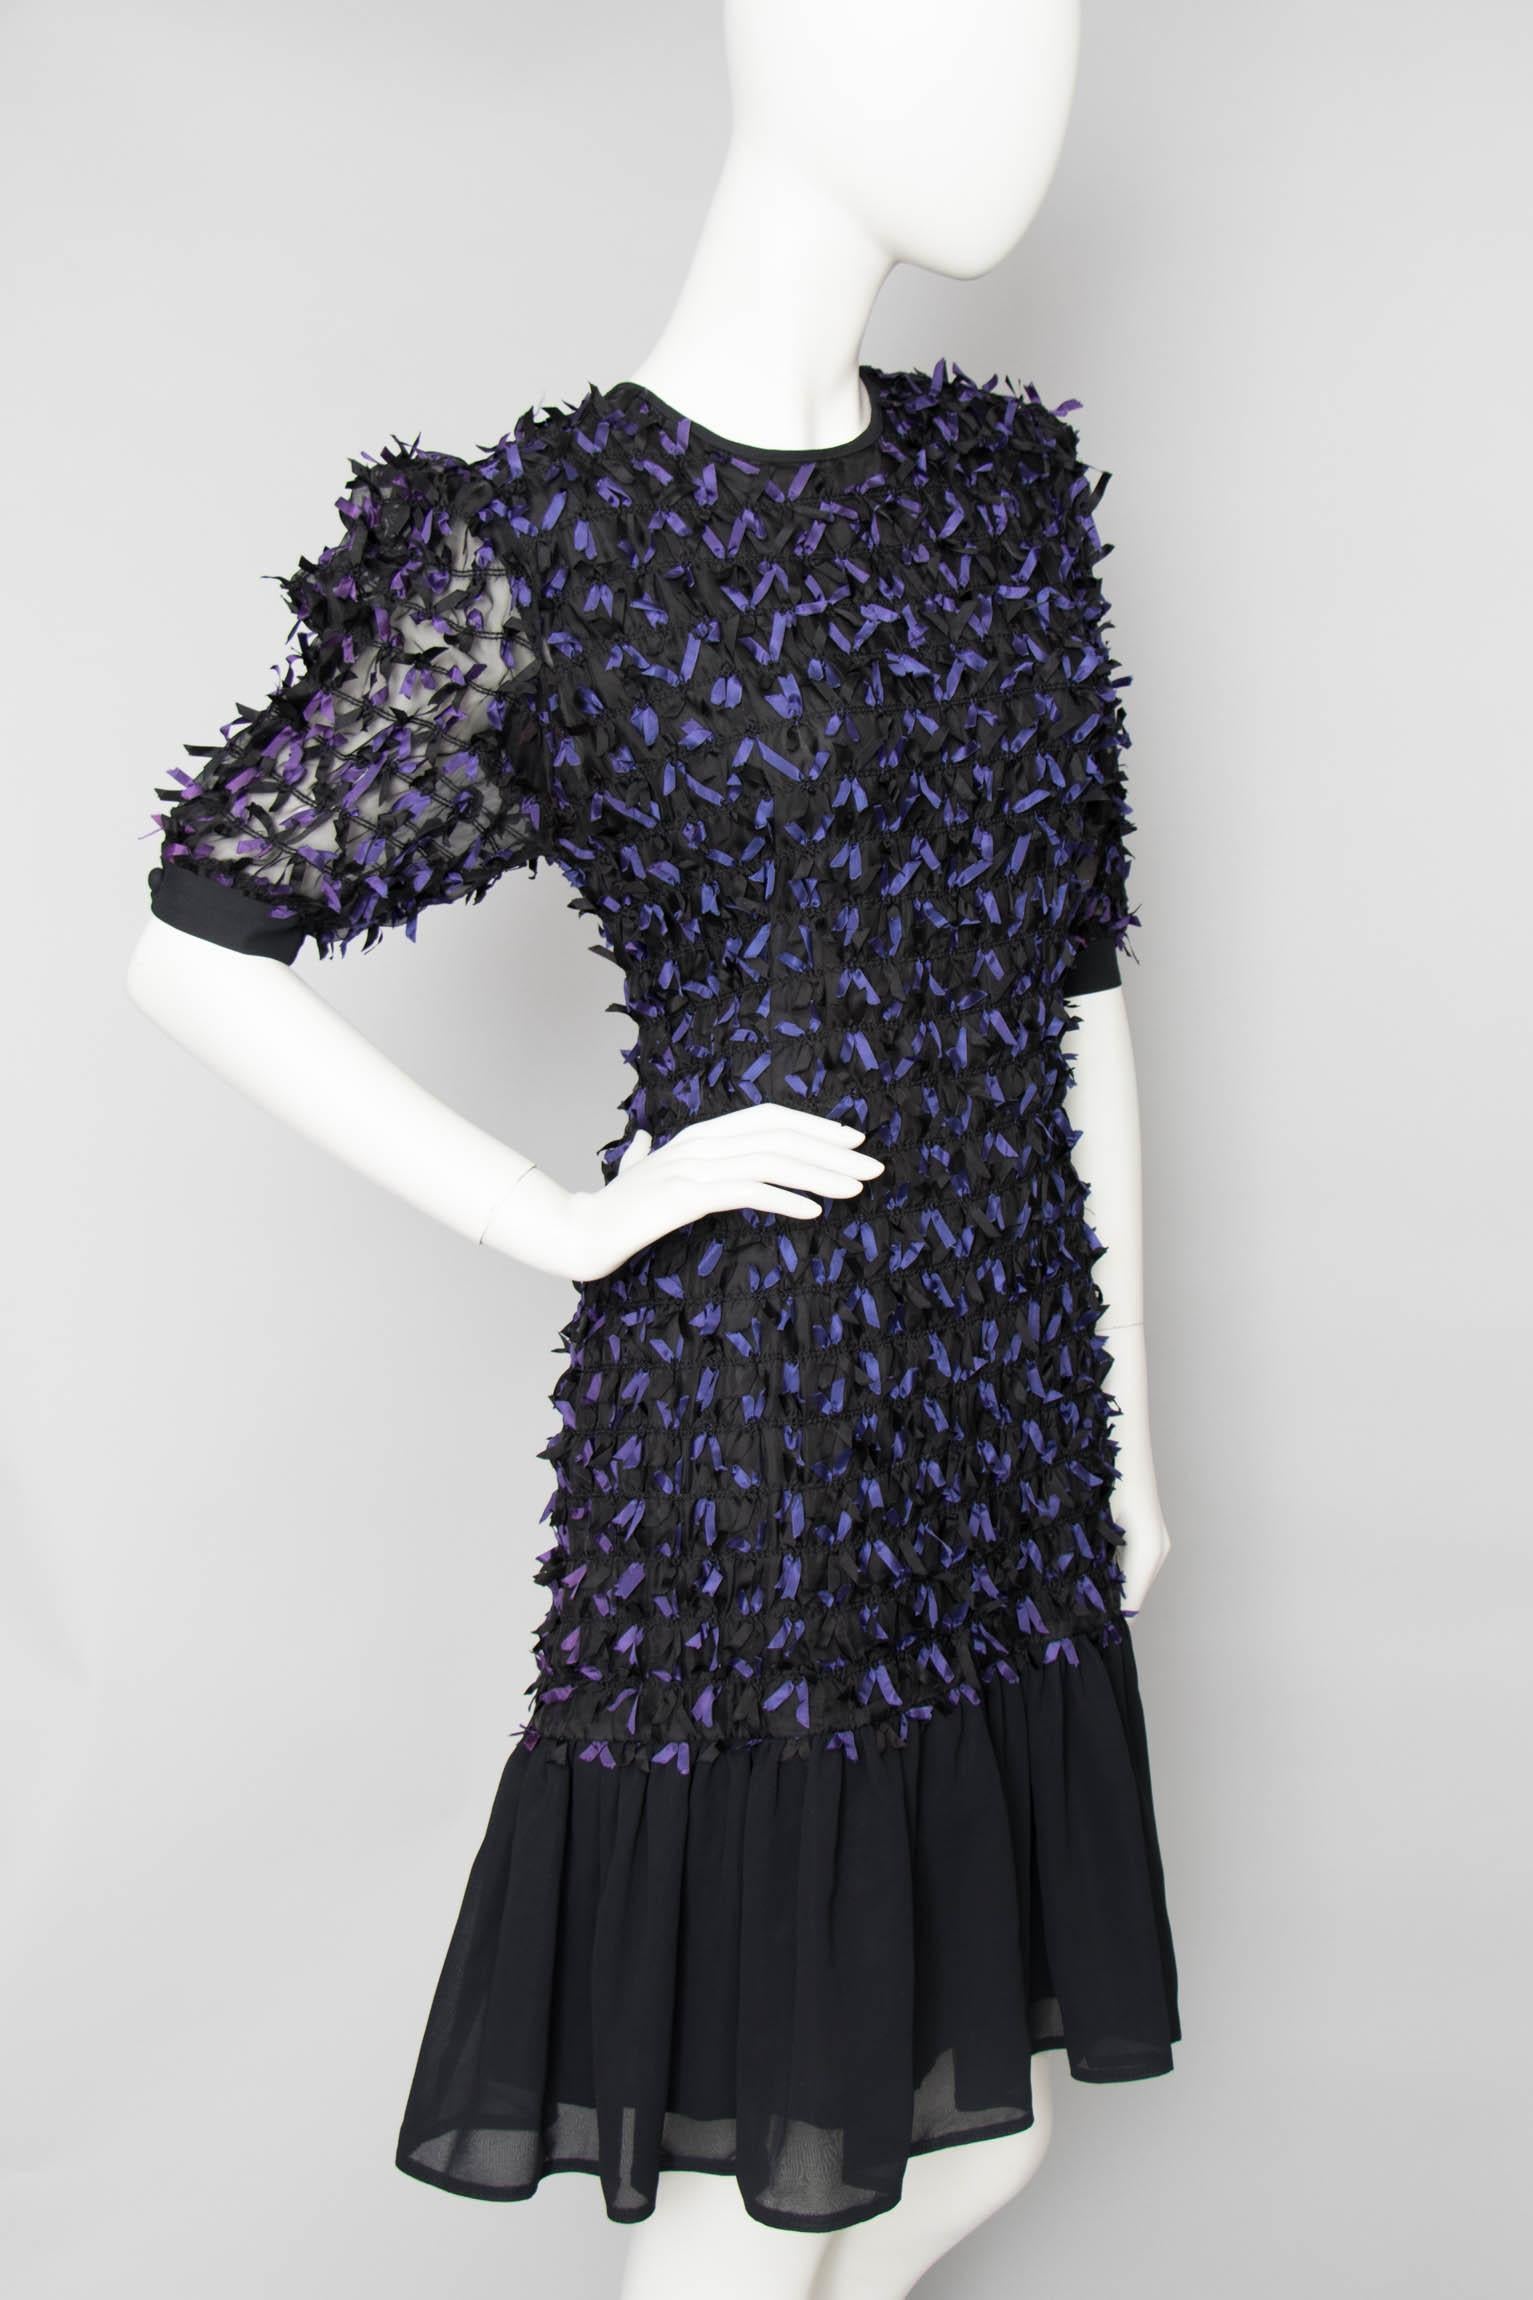 A 1980s Givenchy En Plus black cocktail dress with a round neckline, puffed shoulders and a ruffle hemline. Small purple and black bows cascade down the dress and short sheer sleeves. The dress is fully lined. 

The size of the dress corresponds to